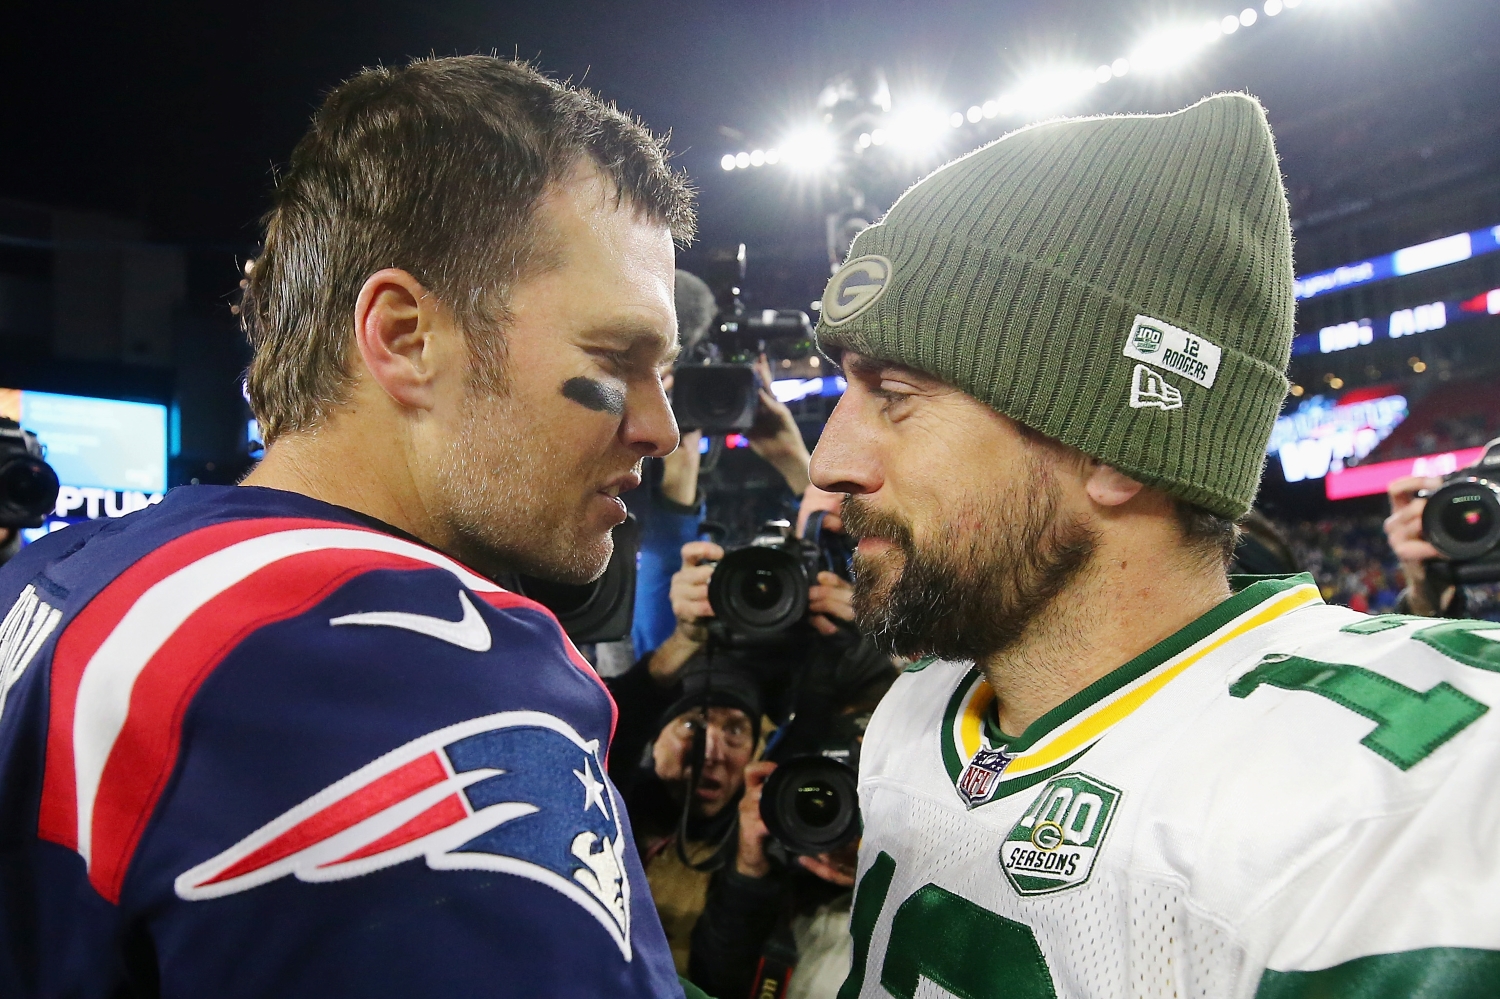 Tom Brady speaks to Aaron Rodgers after a game between the New England Patriots and the Green Bay Packers.